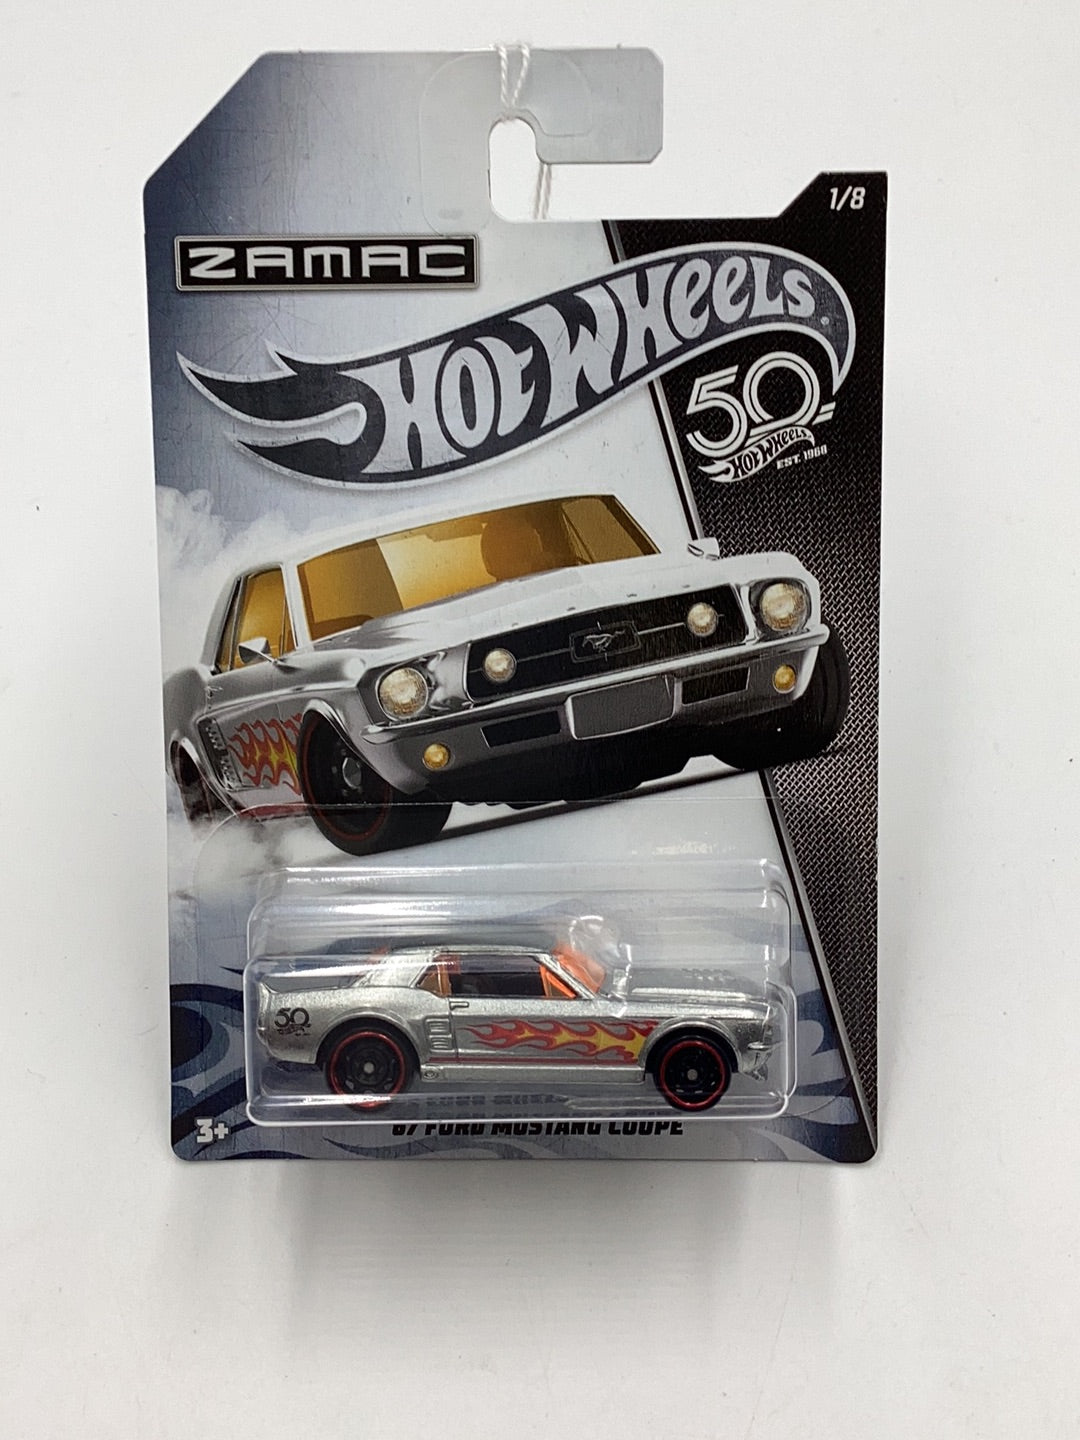 Hot Wheels Zamac Set 67 Ford Mustang Coupe 1/8 149A